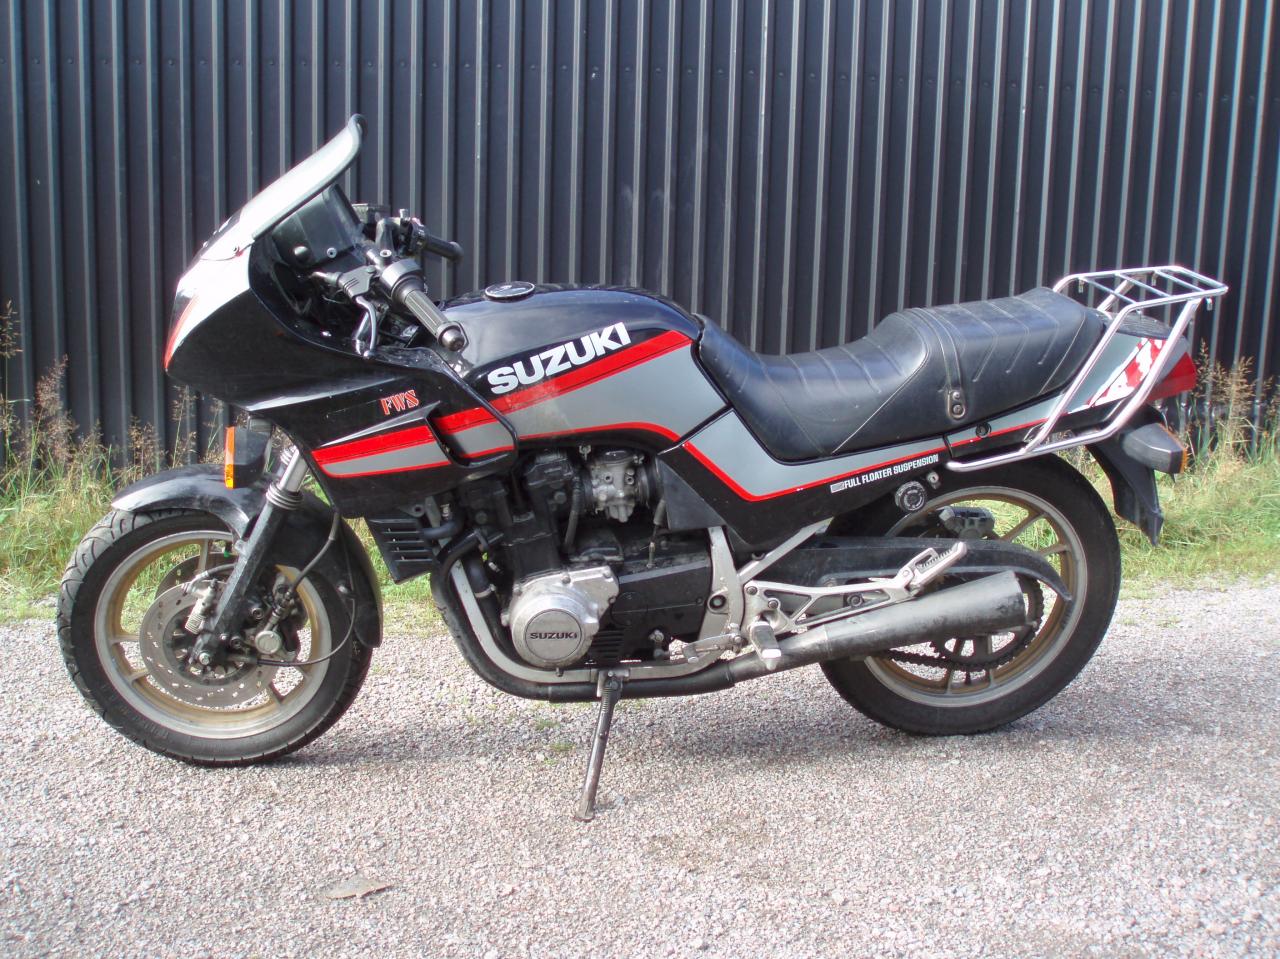 Review of Suzuki GSX 400 S 1984 pictures, live photos